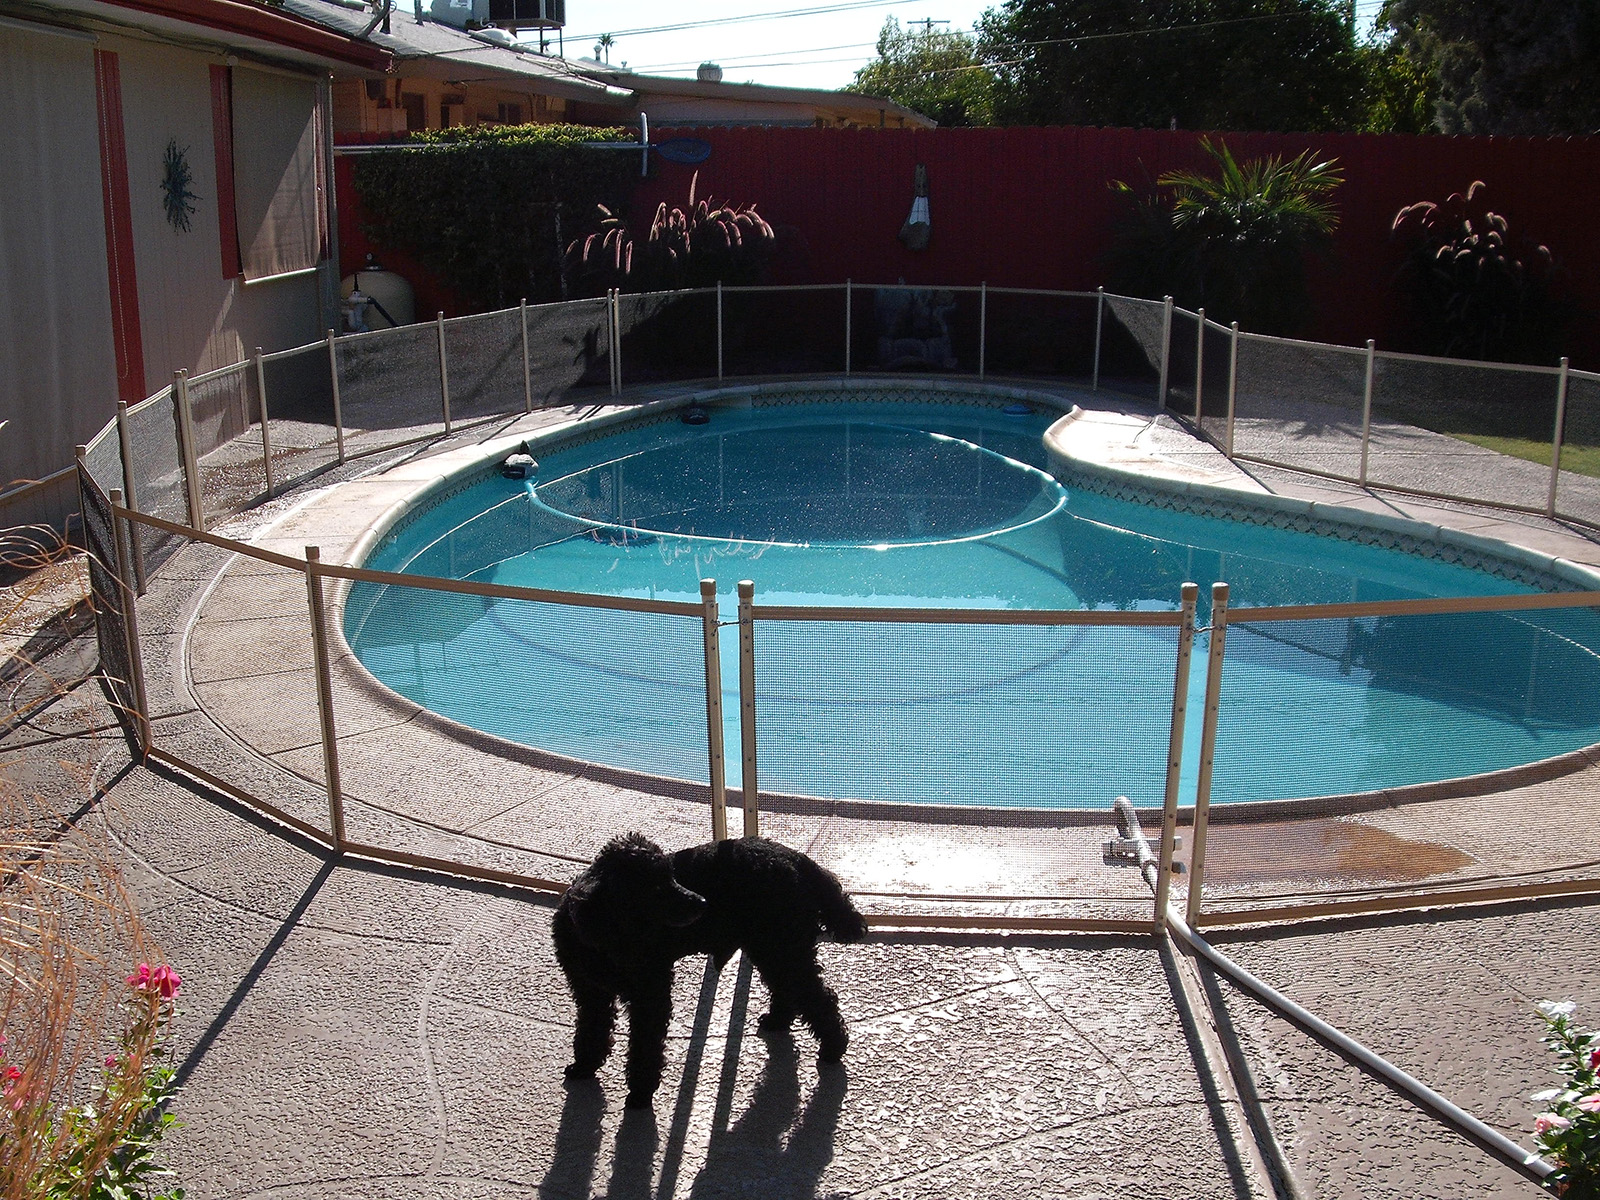 3 foot dog fence for pool